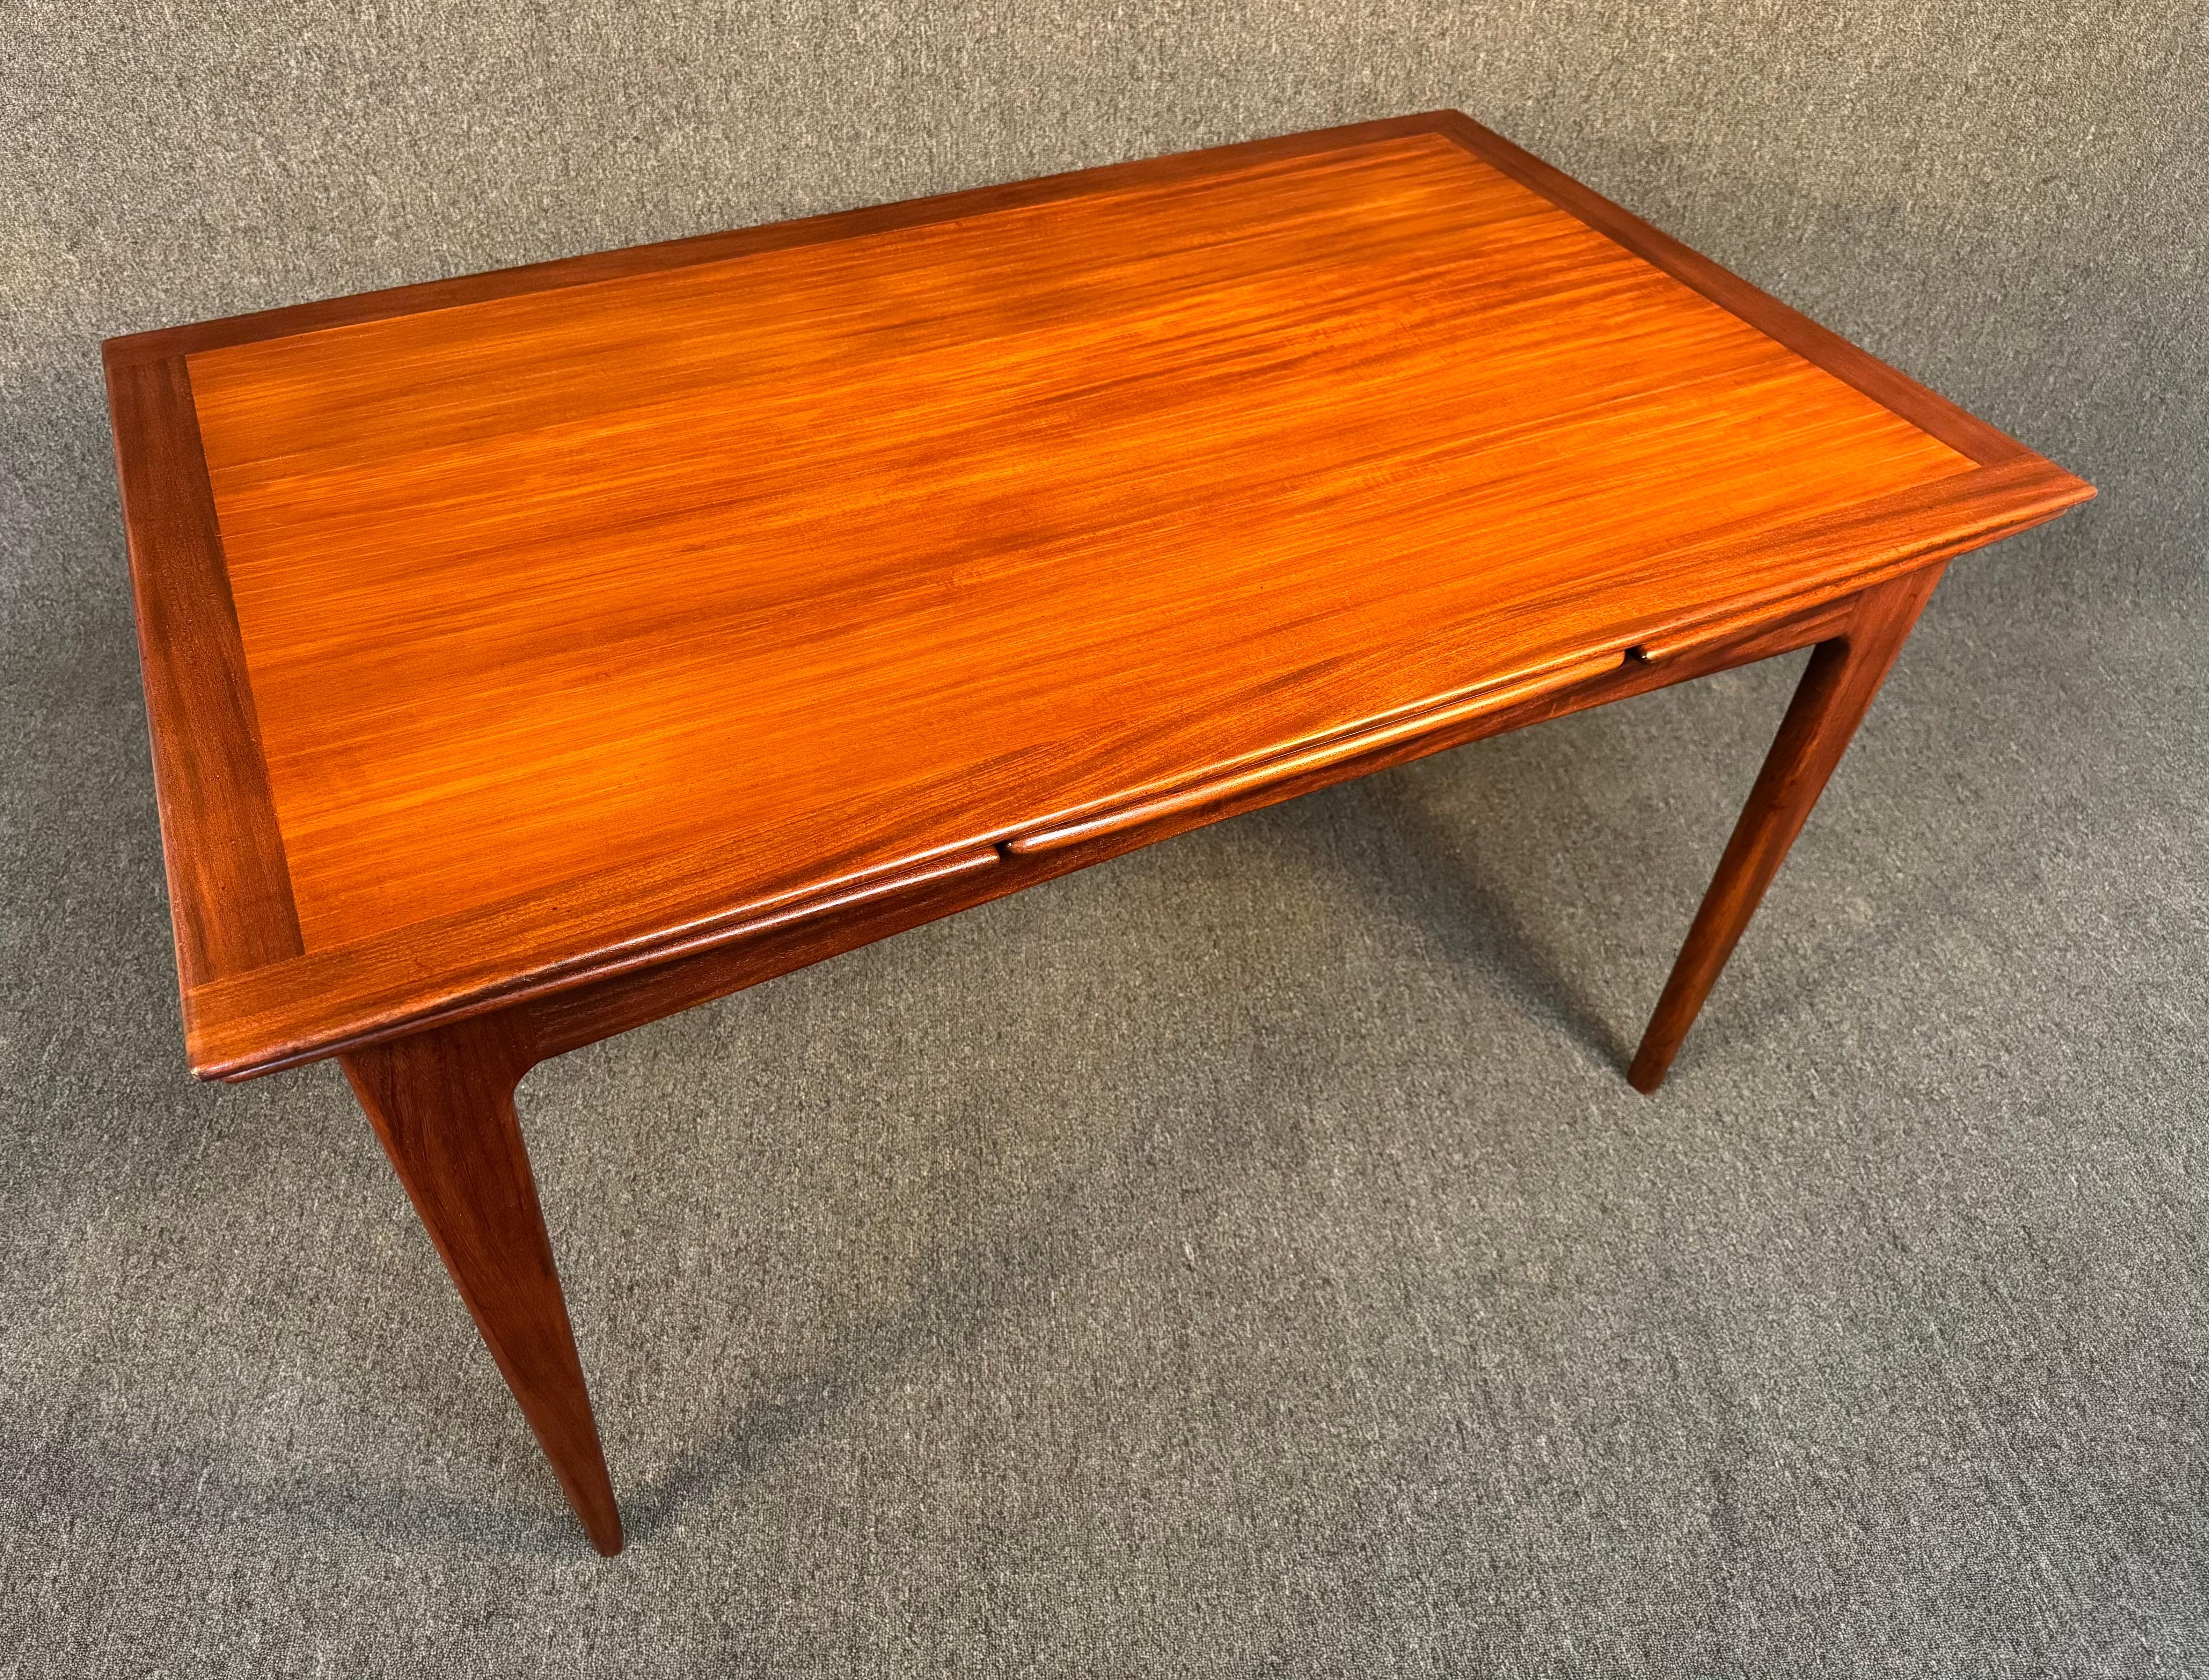 Vintage British Mid Century Modern Afromasia Teak Dining Table by A. Younger Ltd For Sale 4